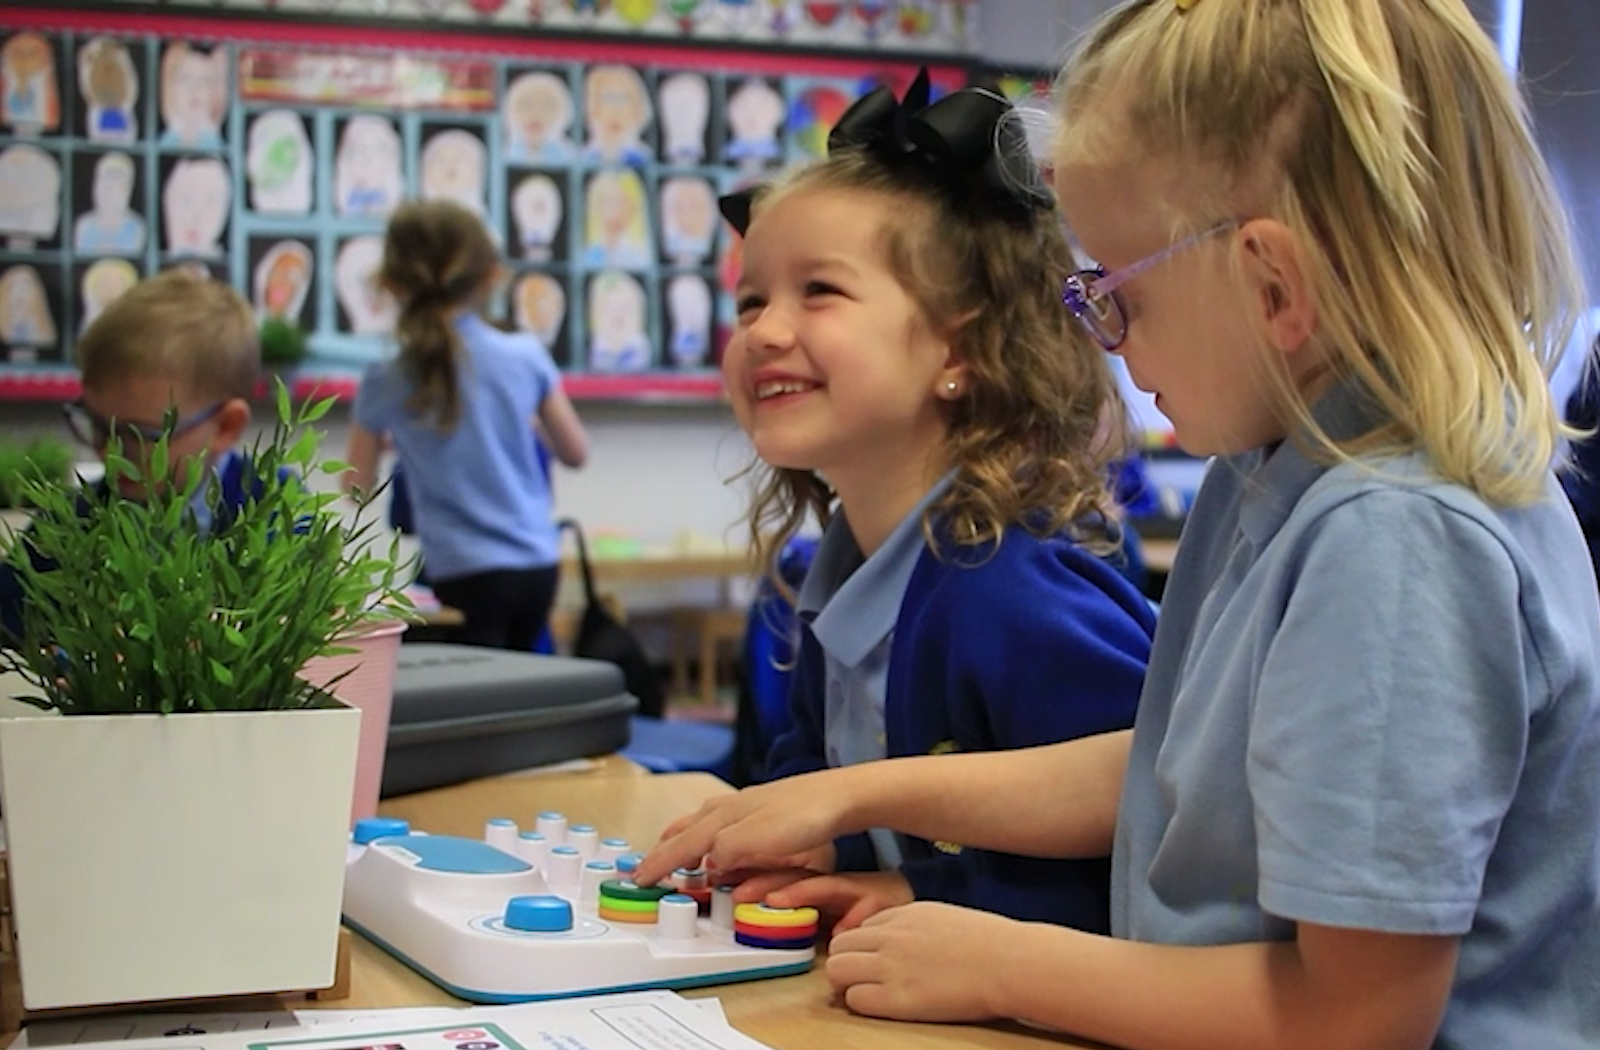 Load video: Video of primary 2 pupils playing the Soundbops and testing out new songs and resources. Teacher interview about how the session went.